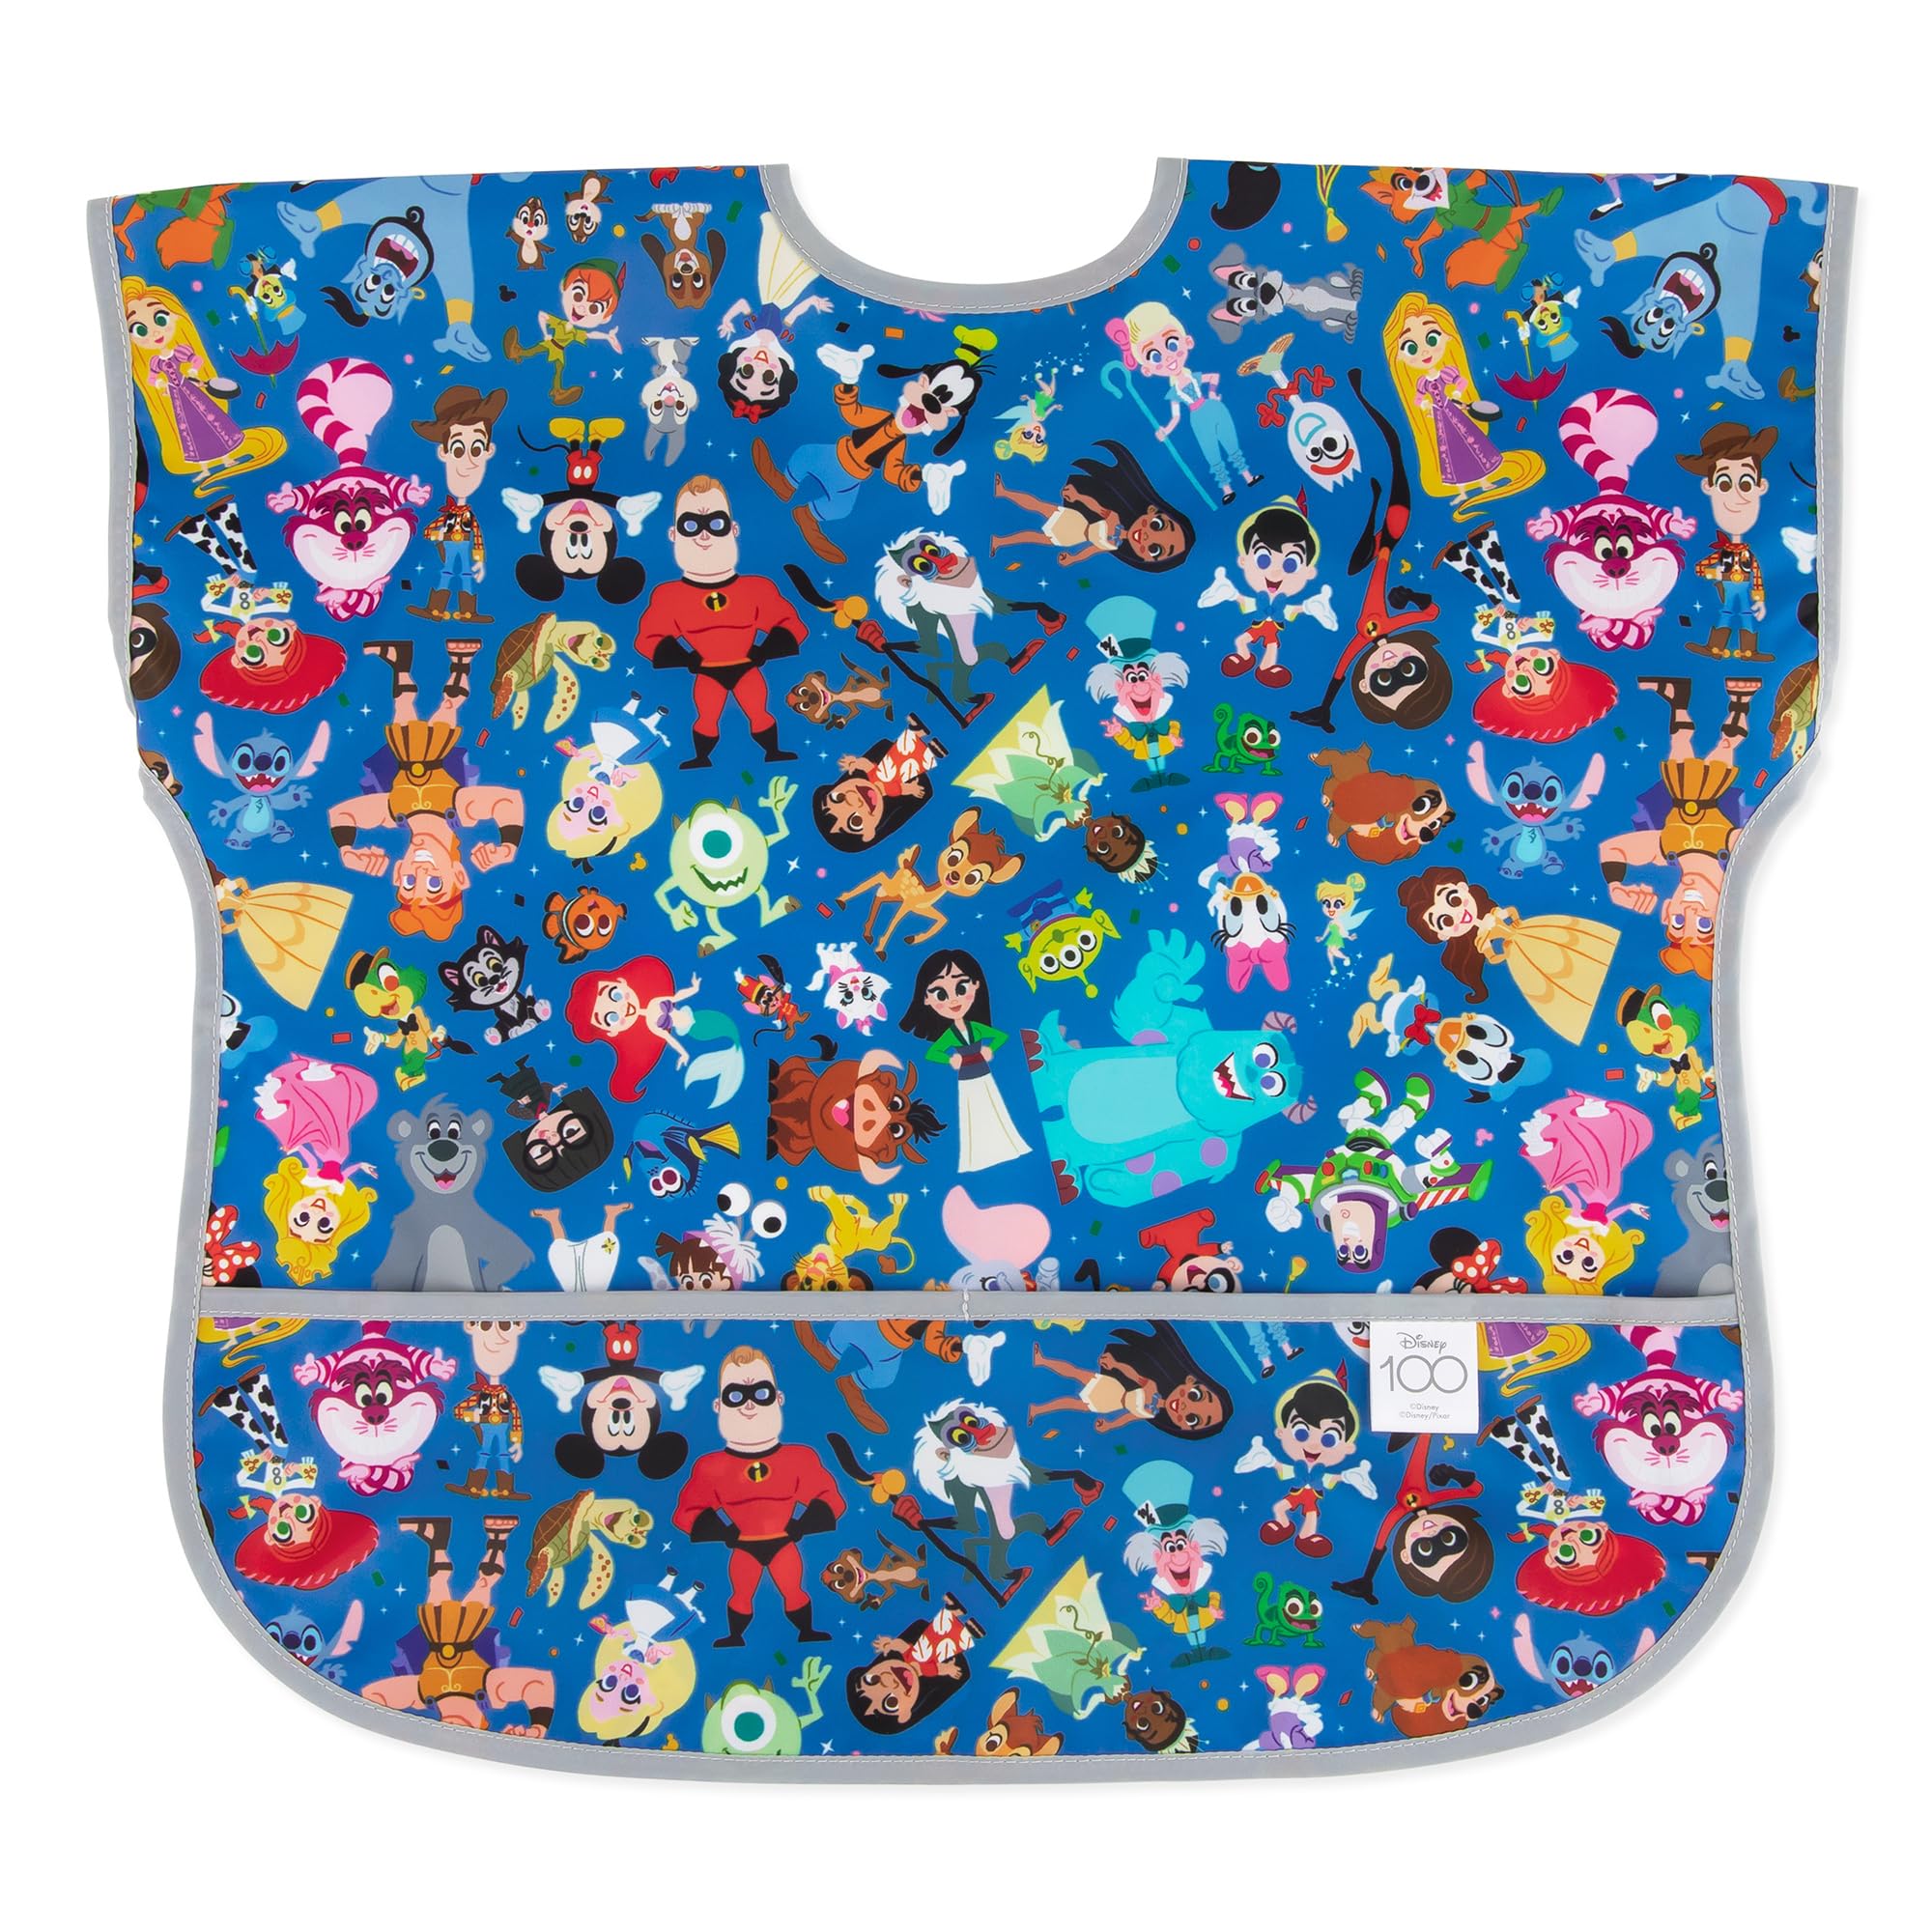 Bumkins Disney Short Sleeve Bib for Girl or Boy, Toddler and Kids for 1-3 Years, Large Size, Essential Must Have for Junior Children, Eating, Mess Saving Soft Fabric Apron, 100 Magical Celebration